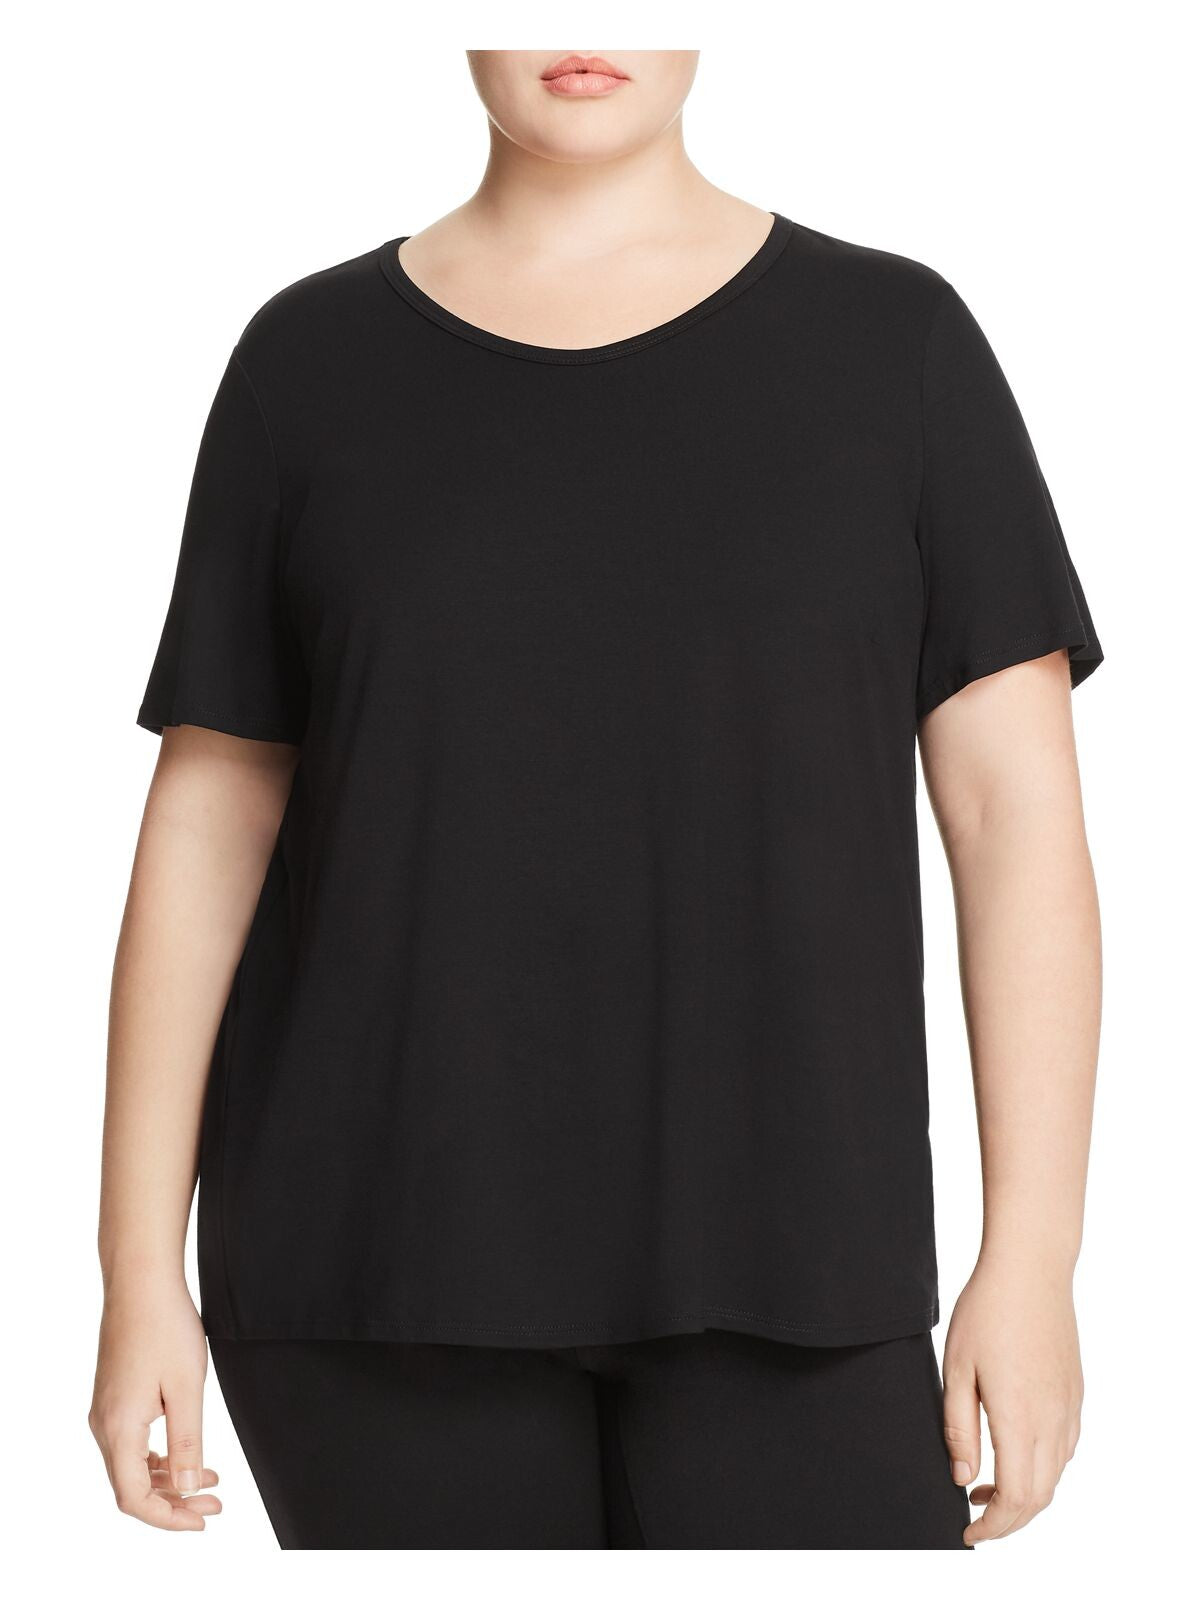 EILEEN FISHER Womens Black Stretch Printed Short Sleeve V Neck Top Plus 3X